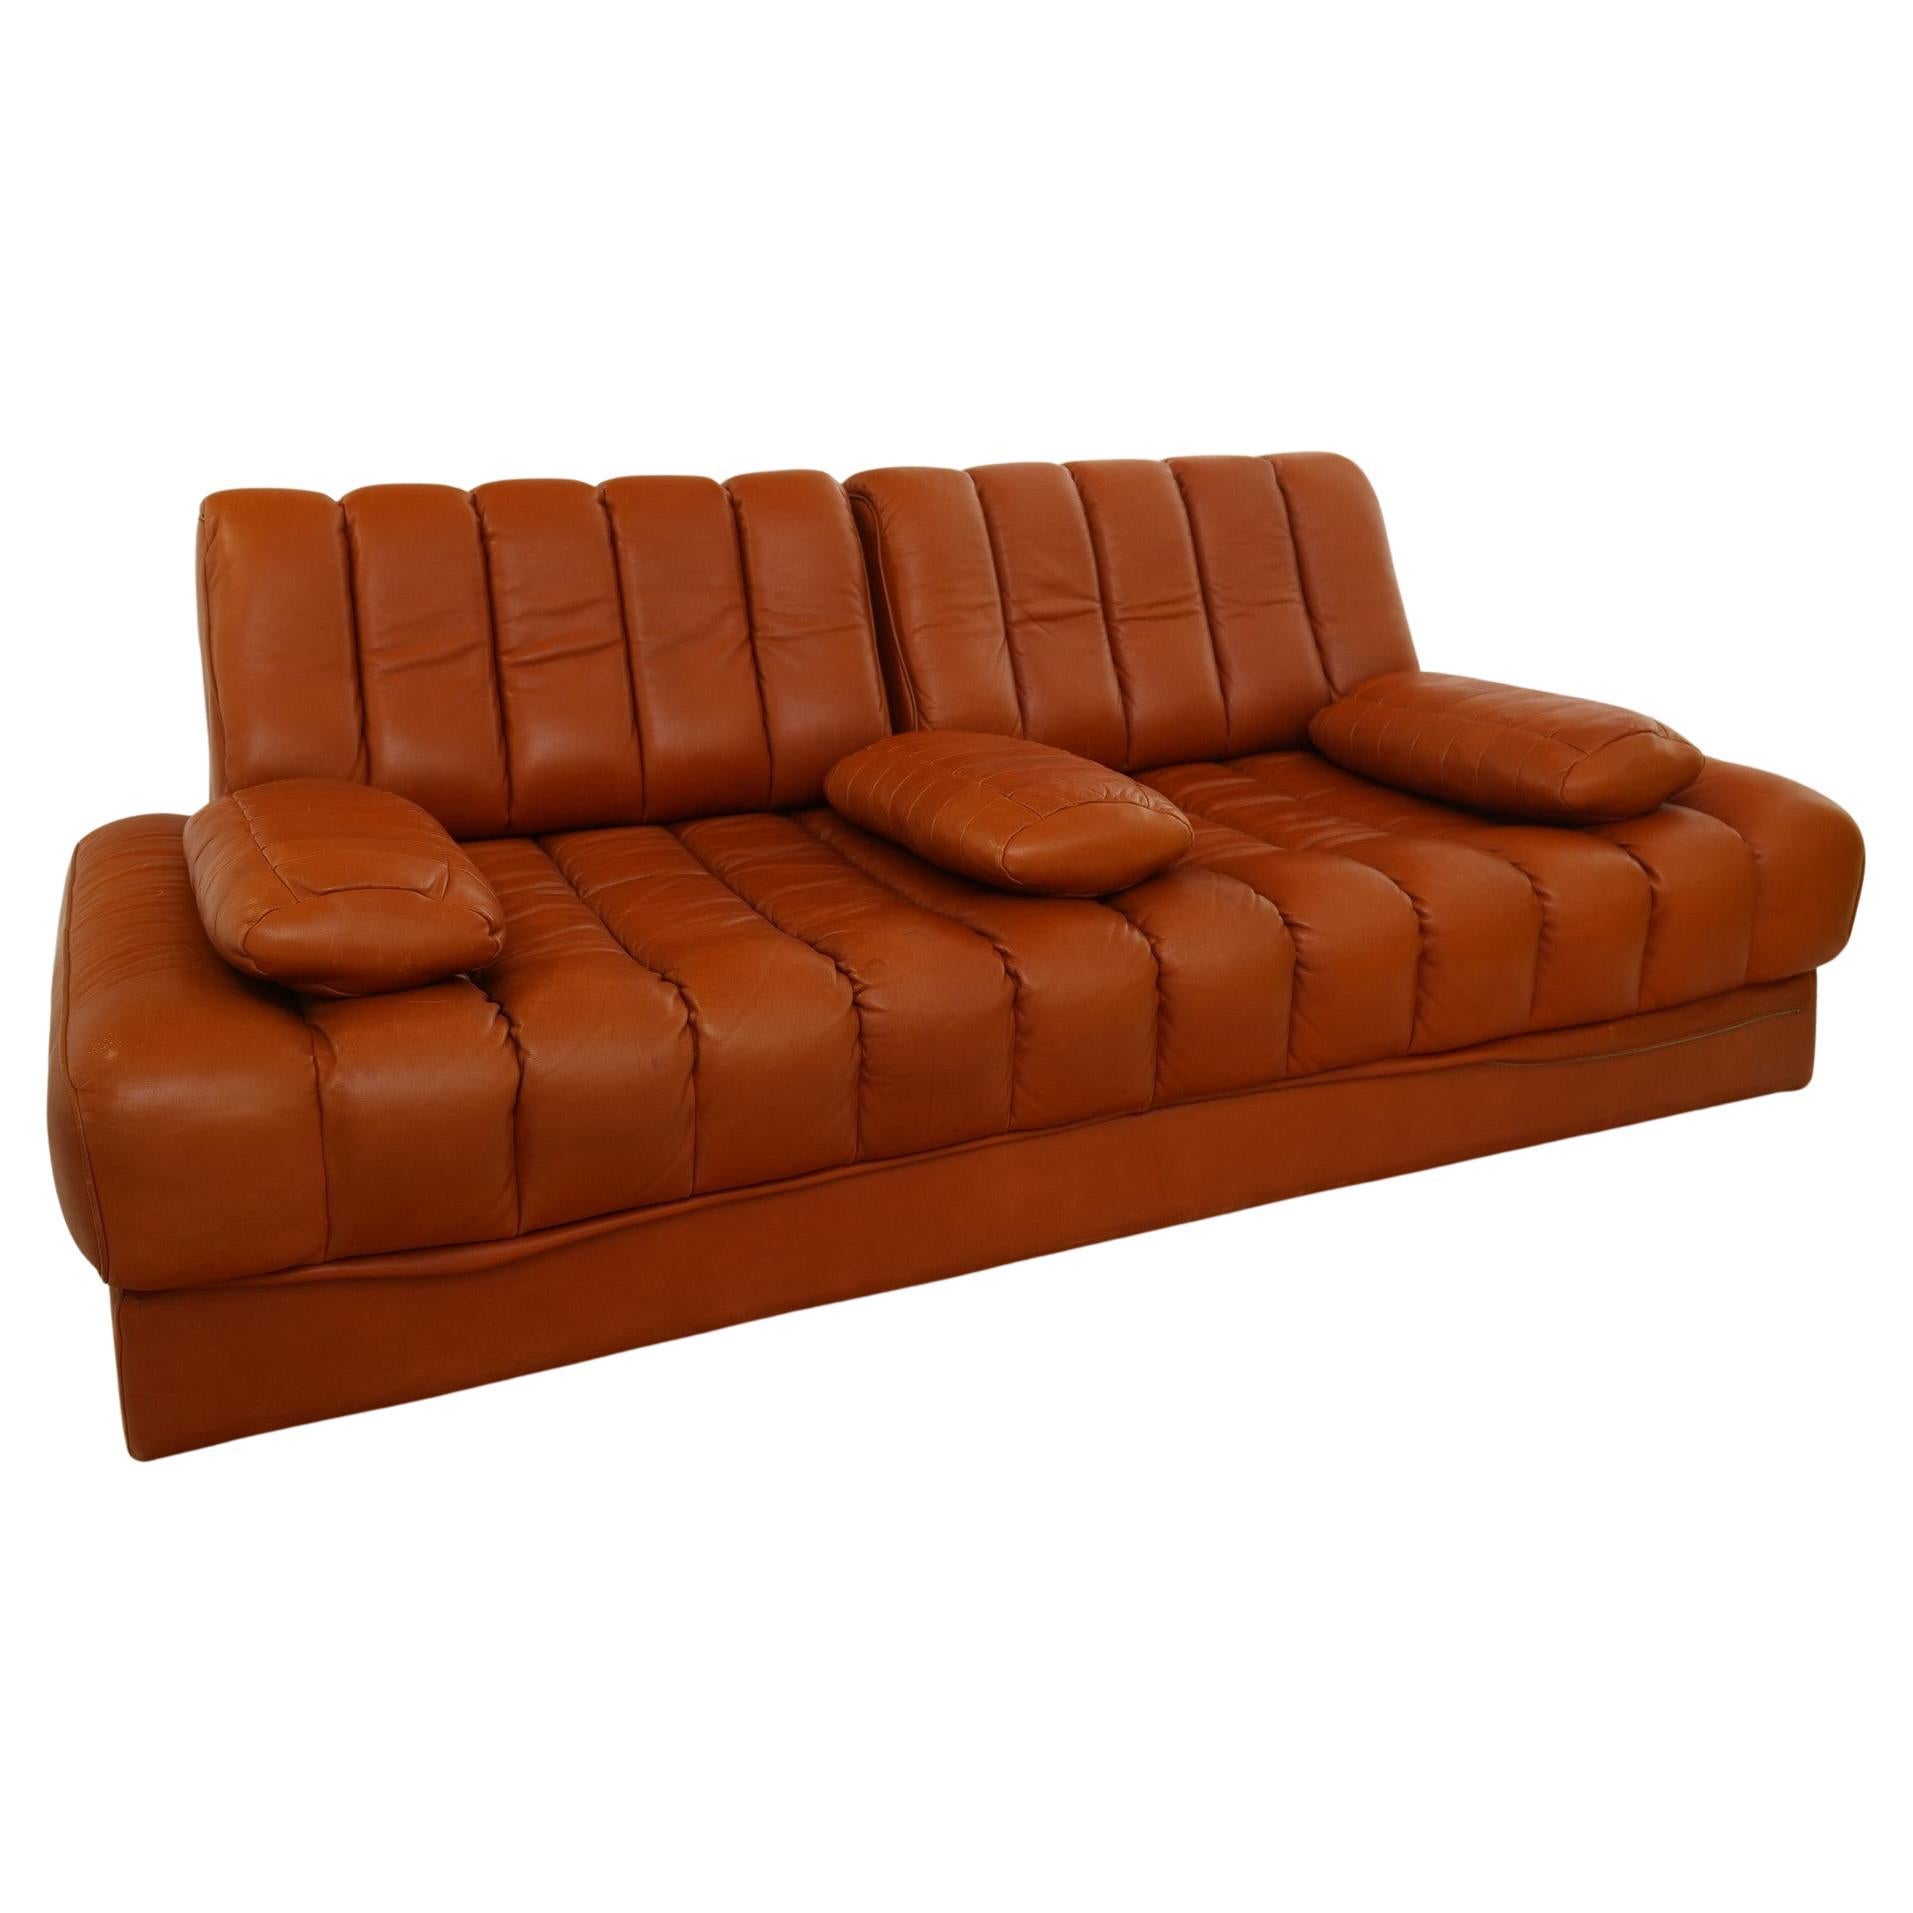 Very hard to find a vintage De Sede brown leather sofa in this mint condition.
The colour is still vibrant and the is minor patina. This sofa has never really been used.

De Sede exclusive line.